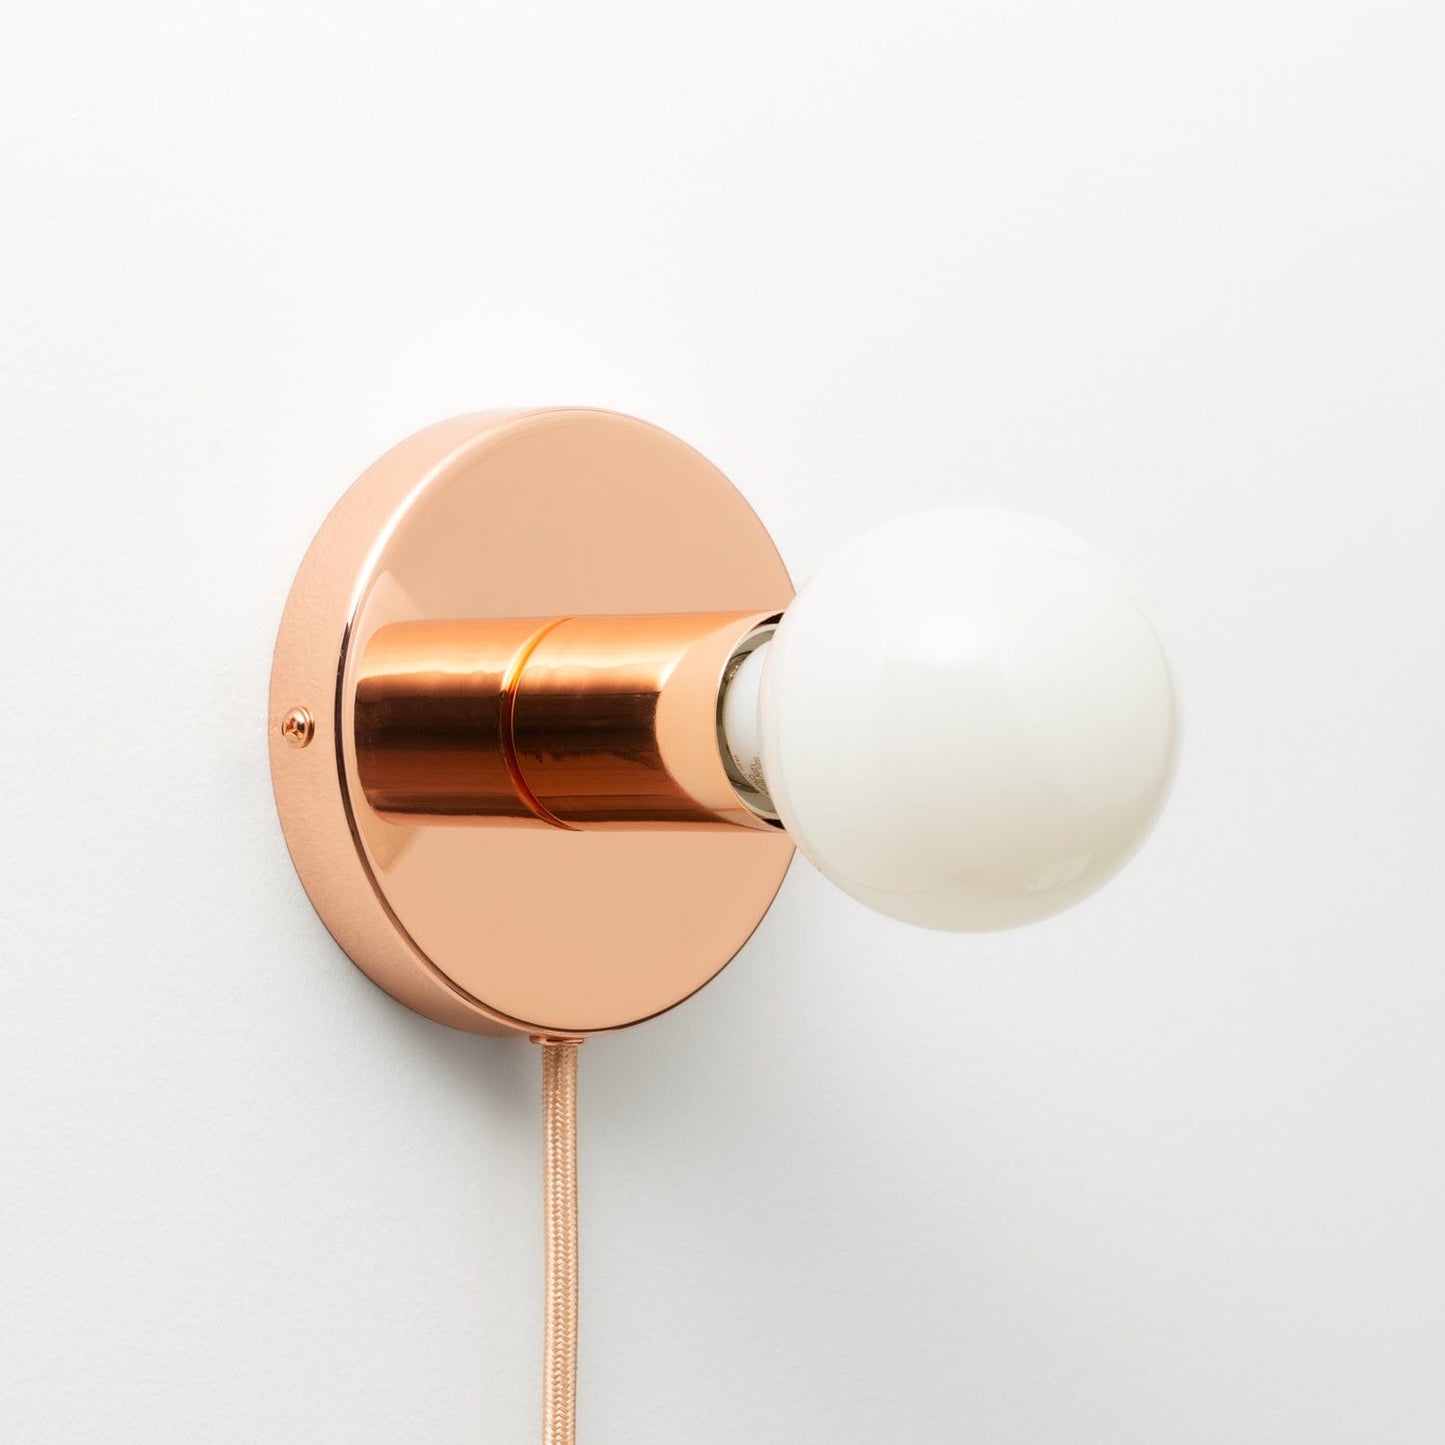 Button Plug-In Sconce in Polished Copper finish with G25 light bulb